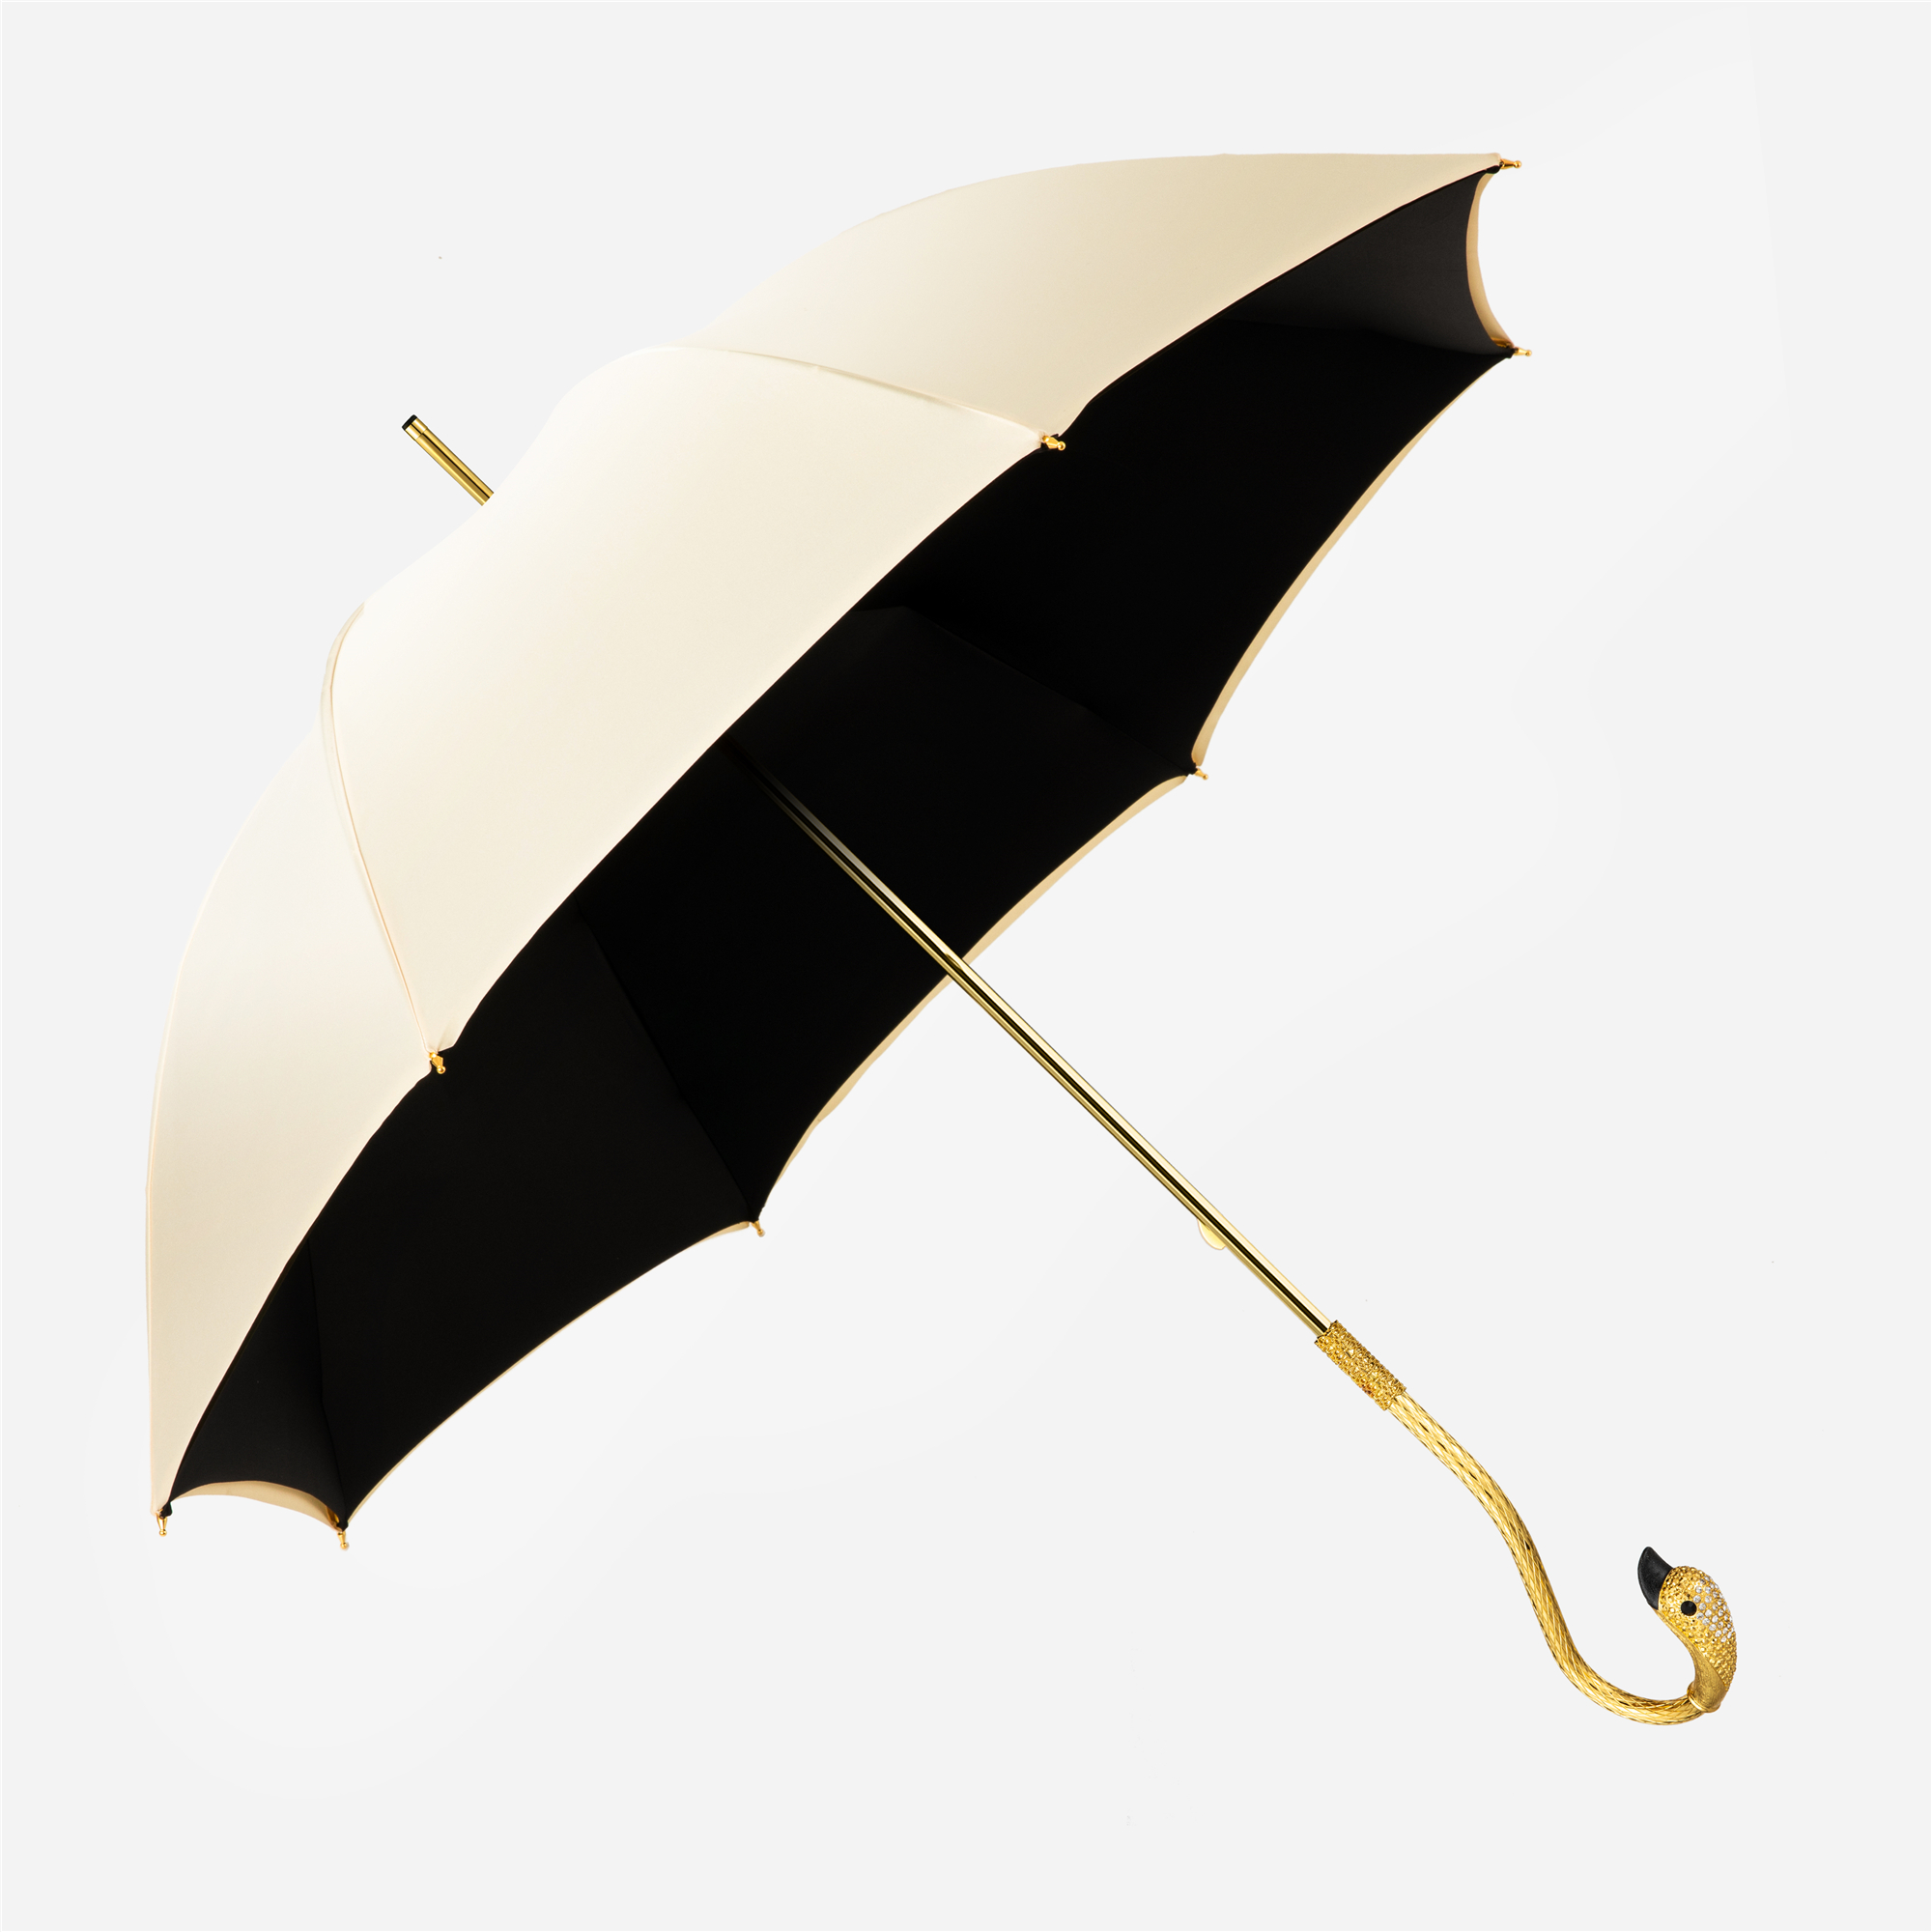 Swan curved double umbrella